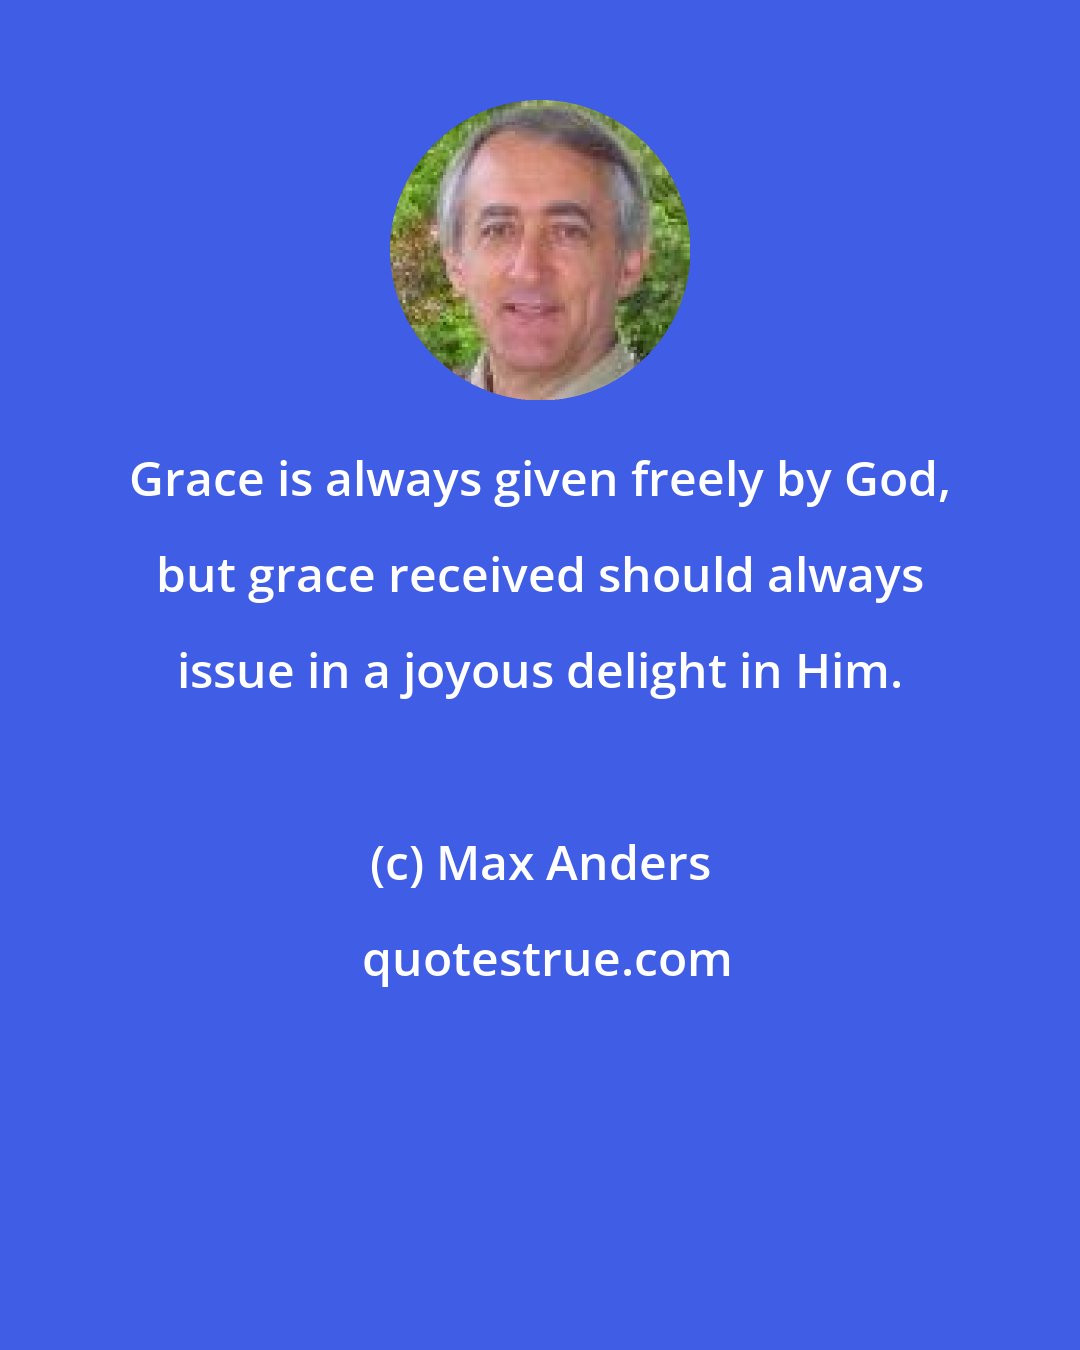 Max Anders: Grace is always given freely by God, but grace received should always issue in a joyous delight in Him.